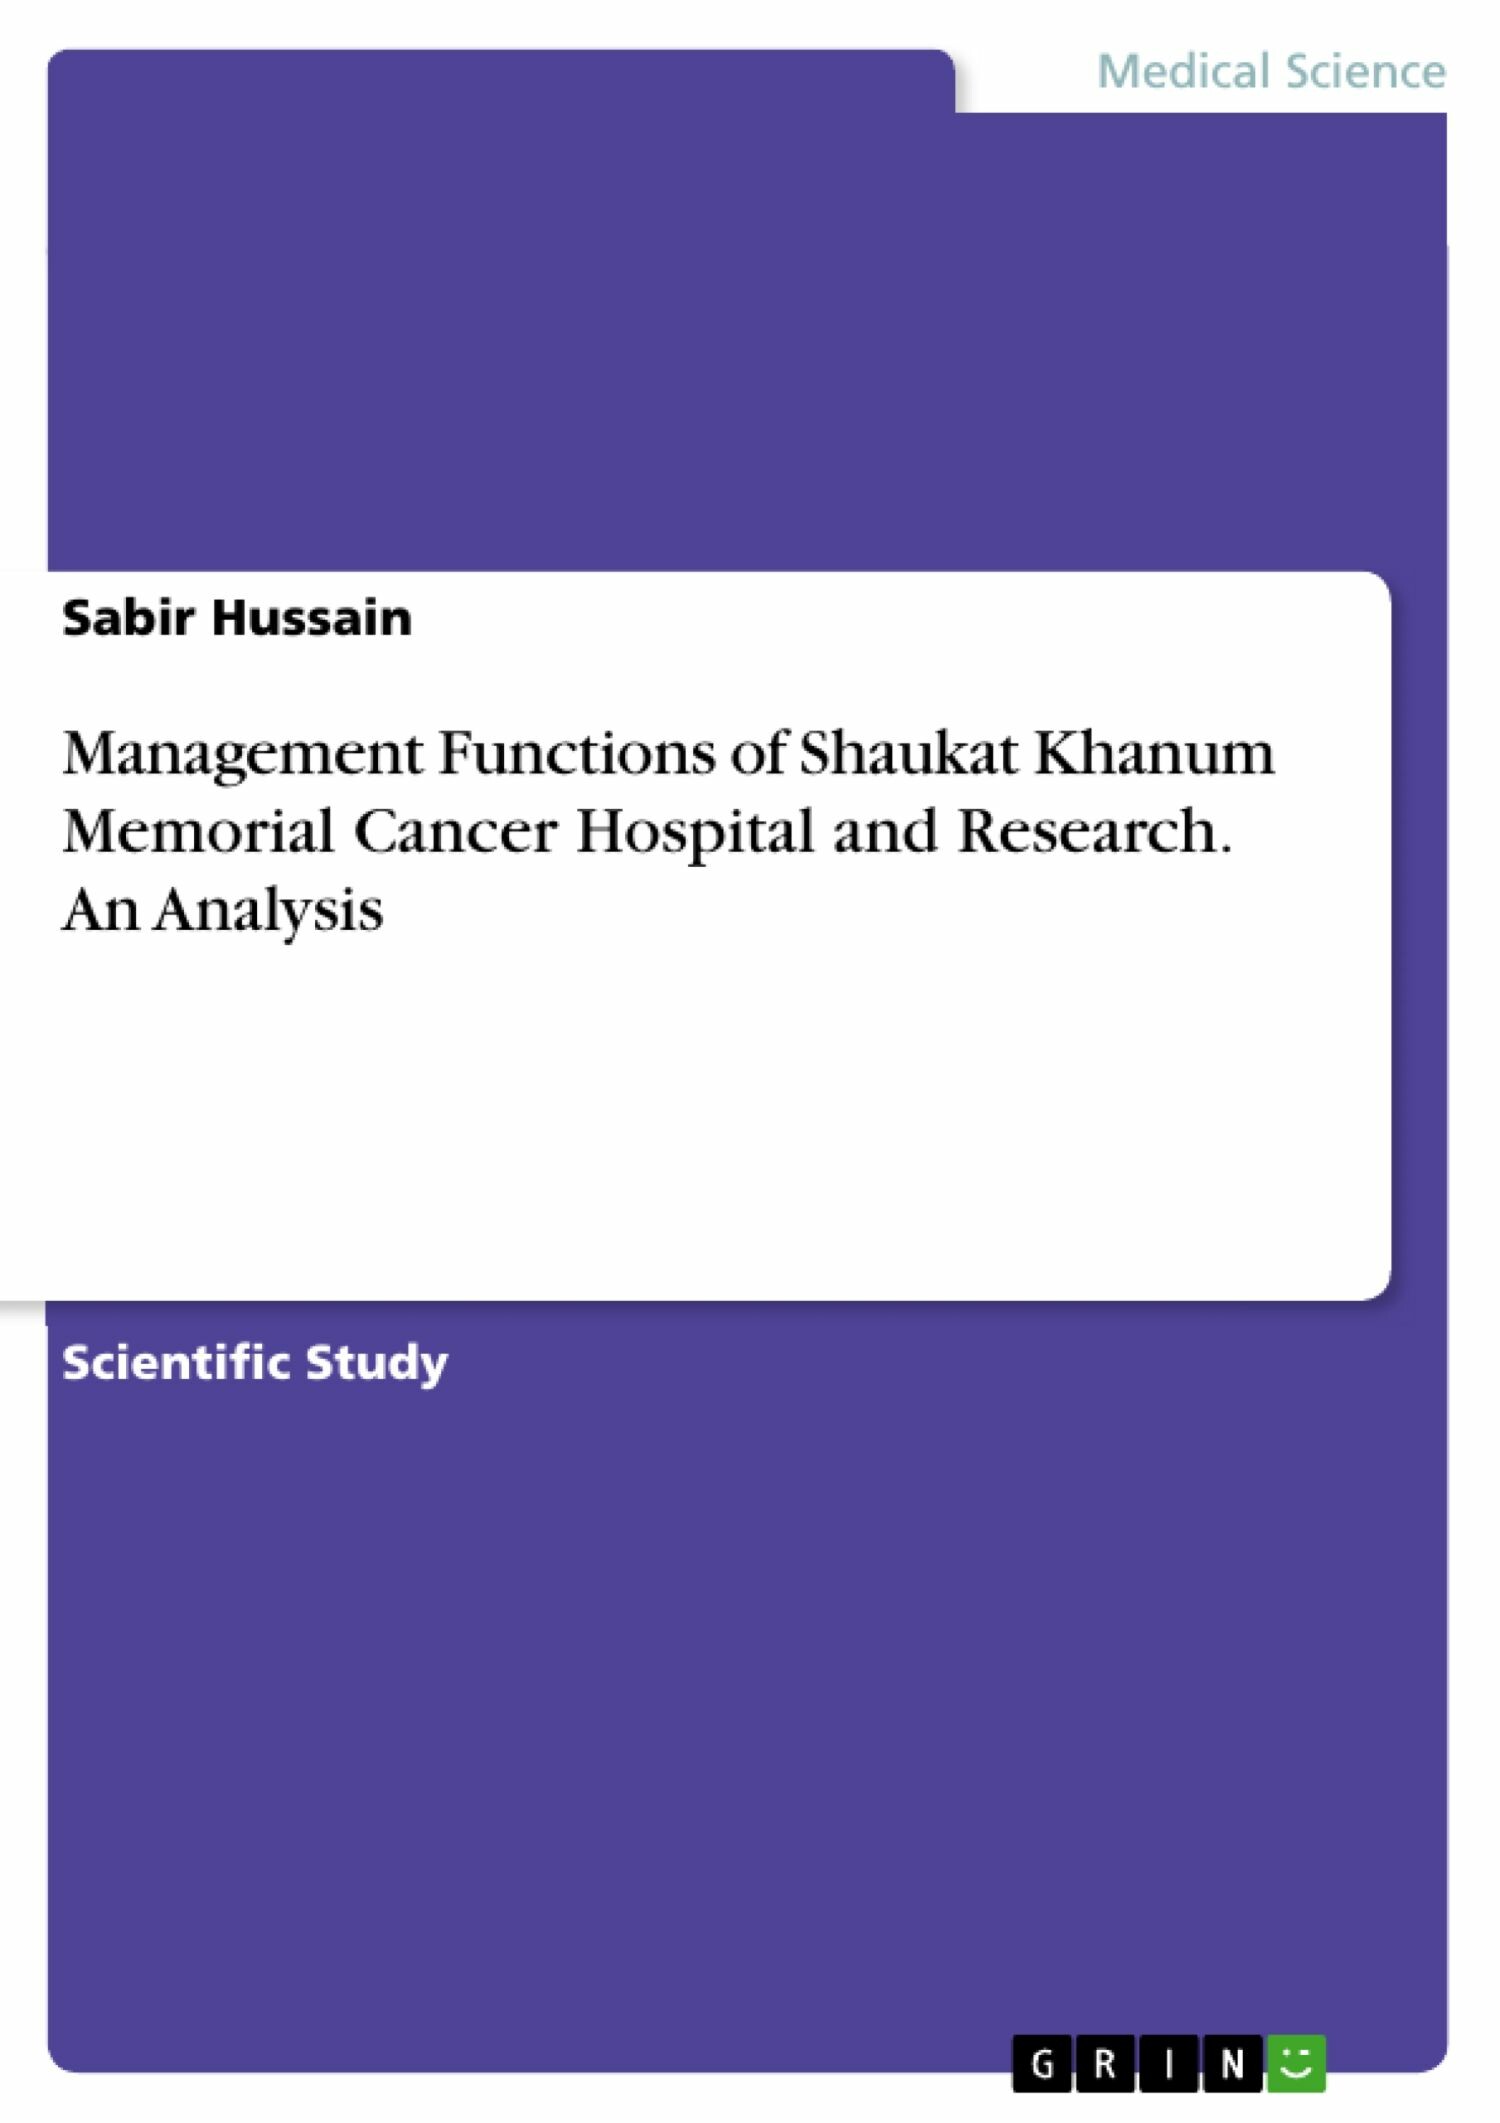 Management Functions of Shaukat Khanum Memorial Cancer Hospital and Research. An Analysis